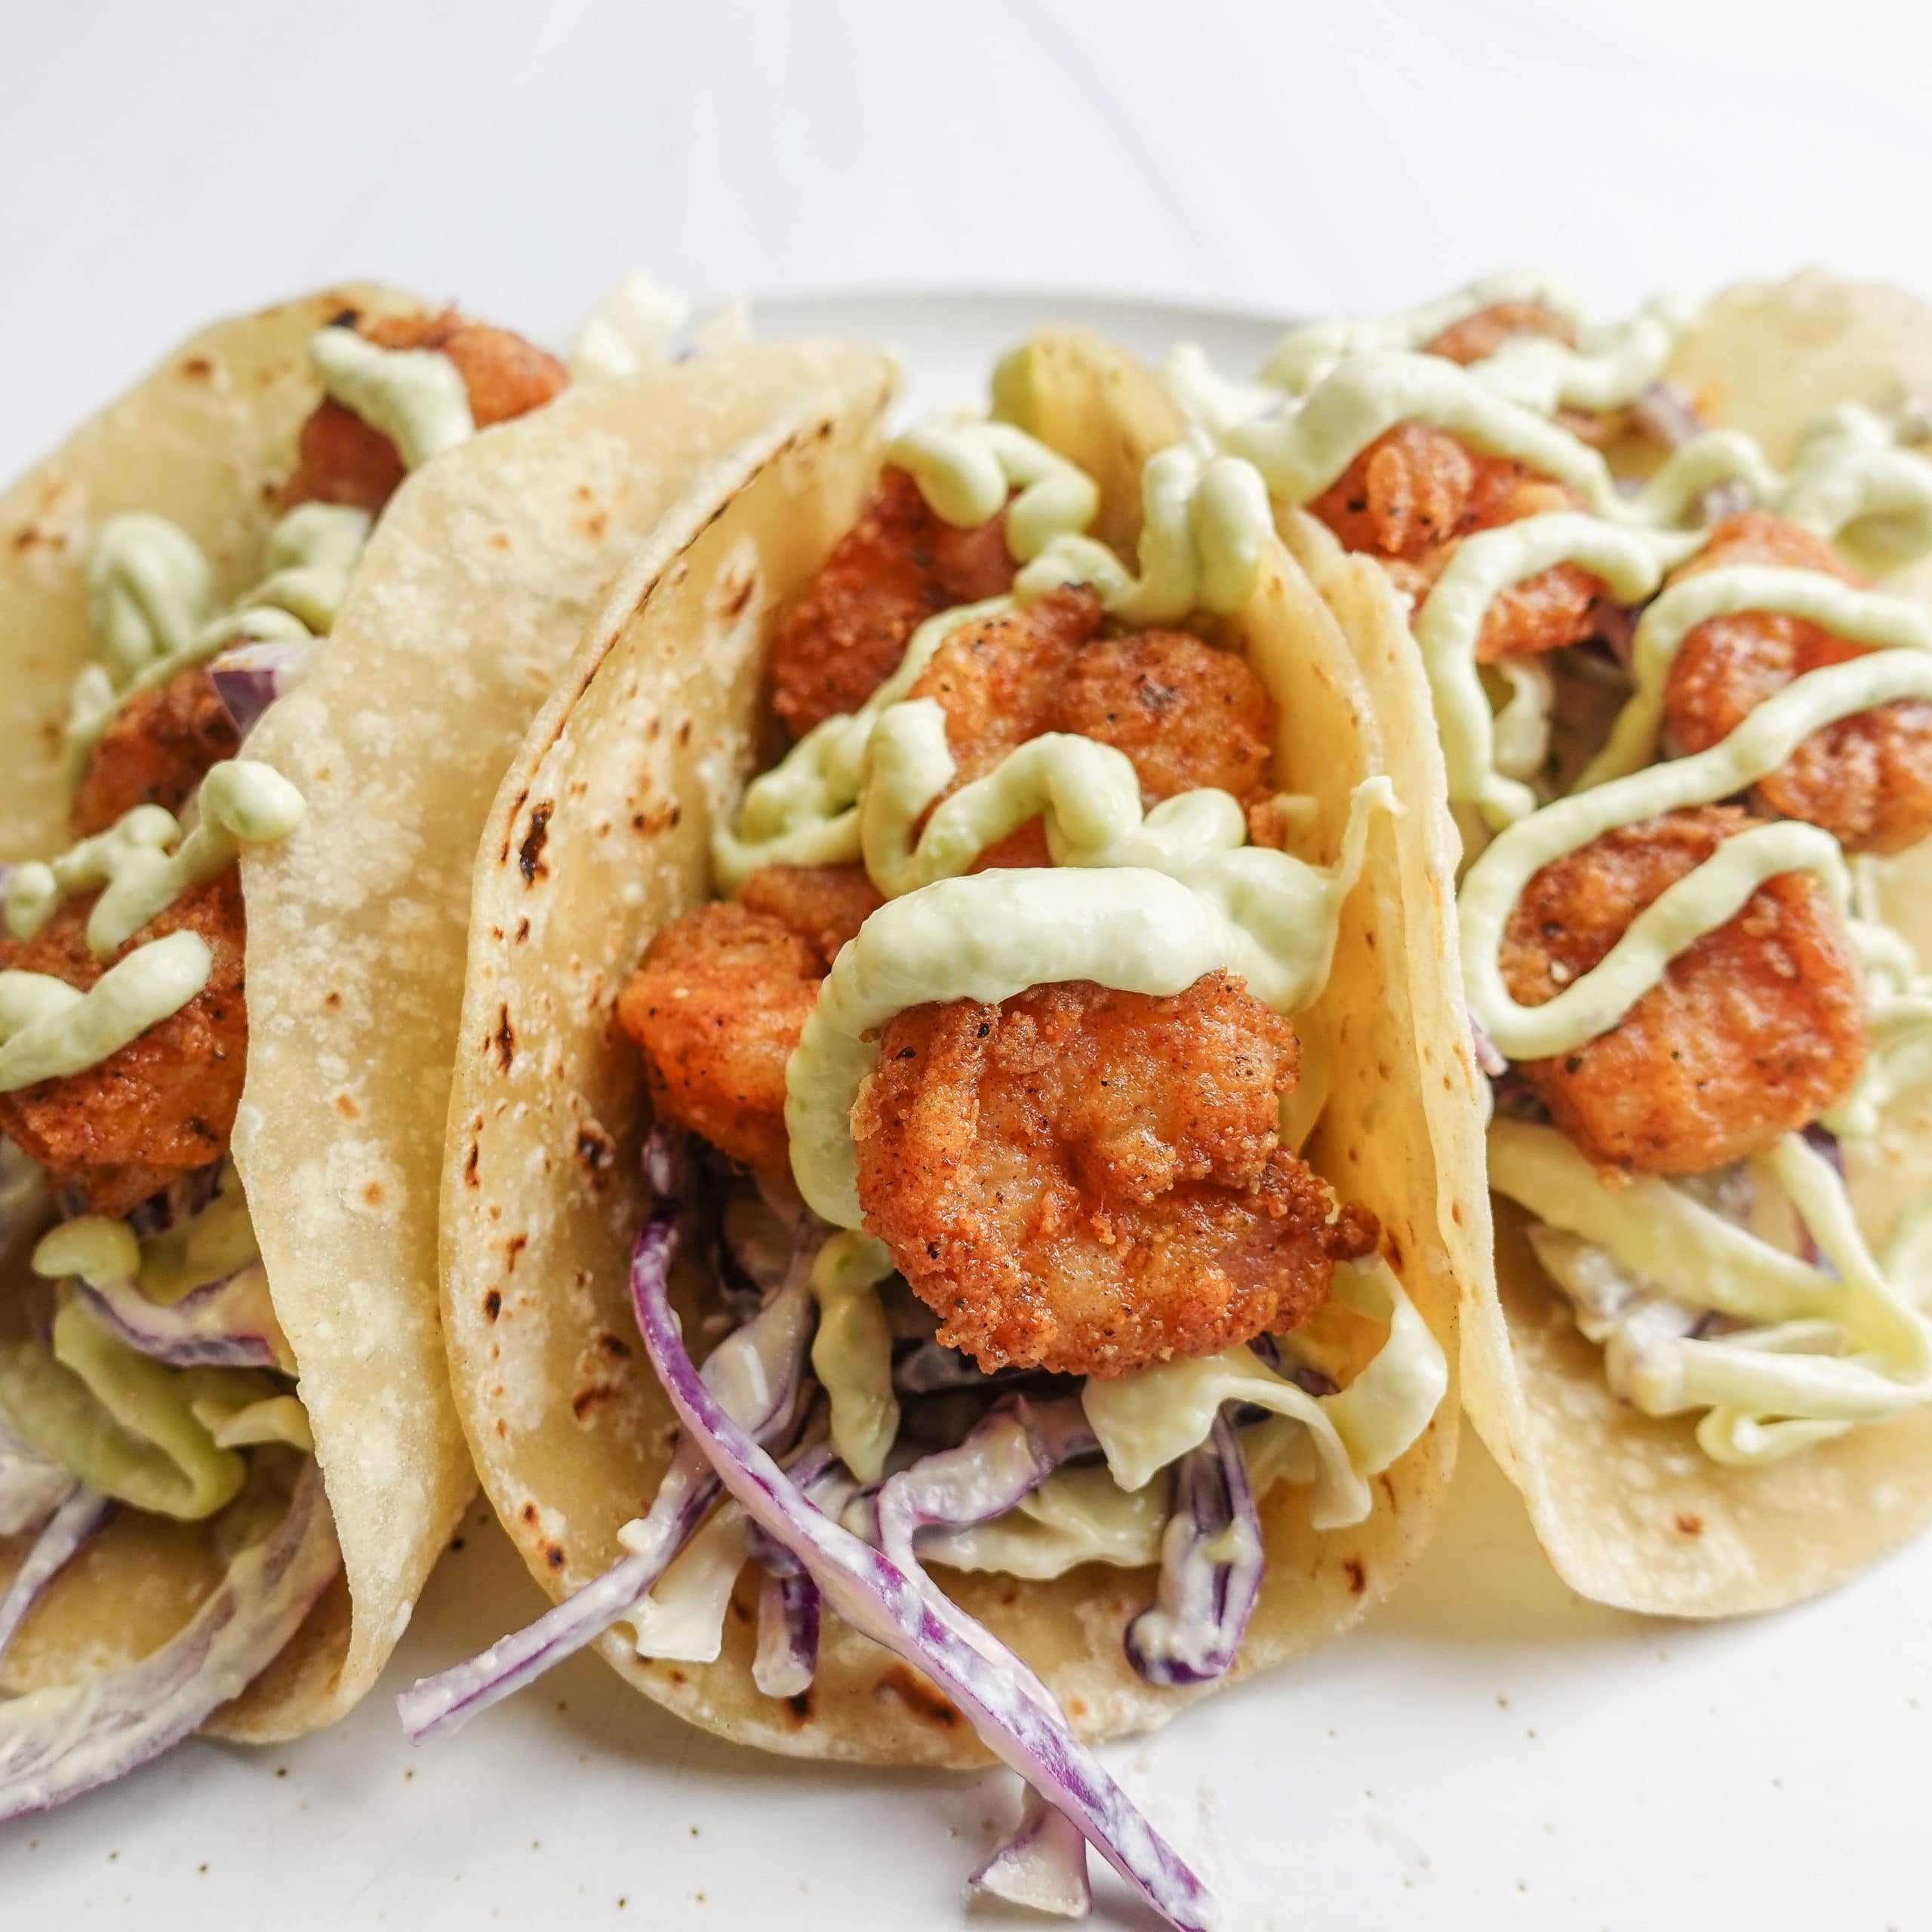 Front facing view of a crispy shrimp taco with an avocado lime slaw and avocado lime sauce drizzle on a homemade flour tortilla.